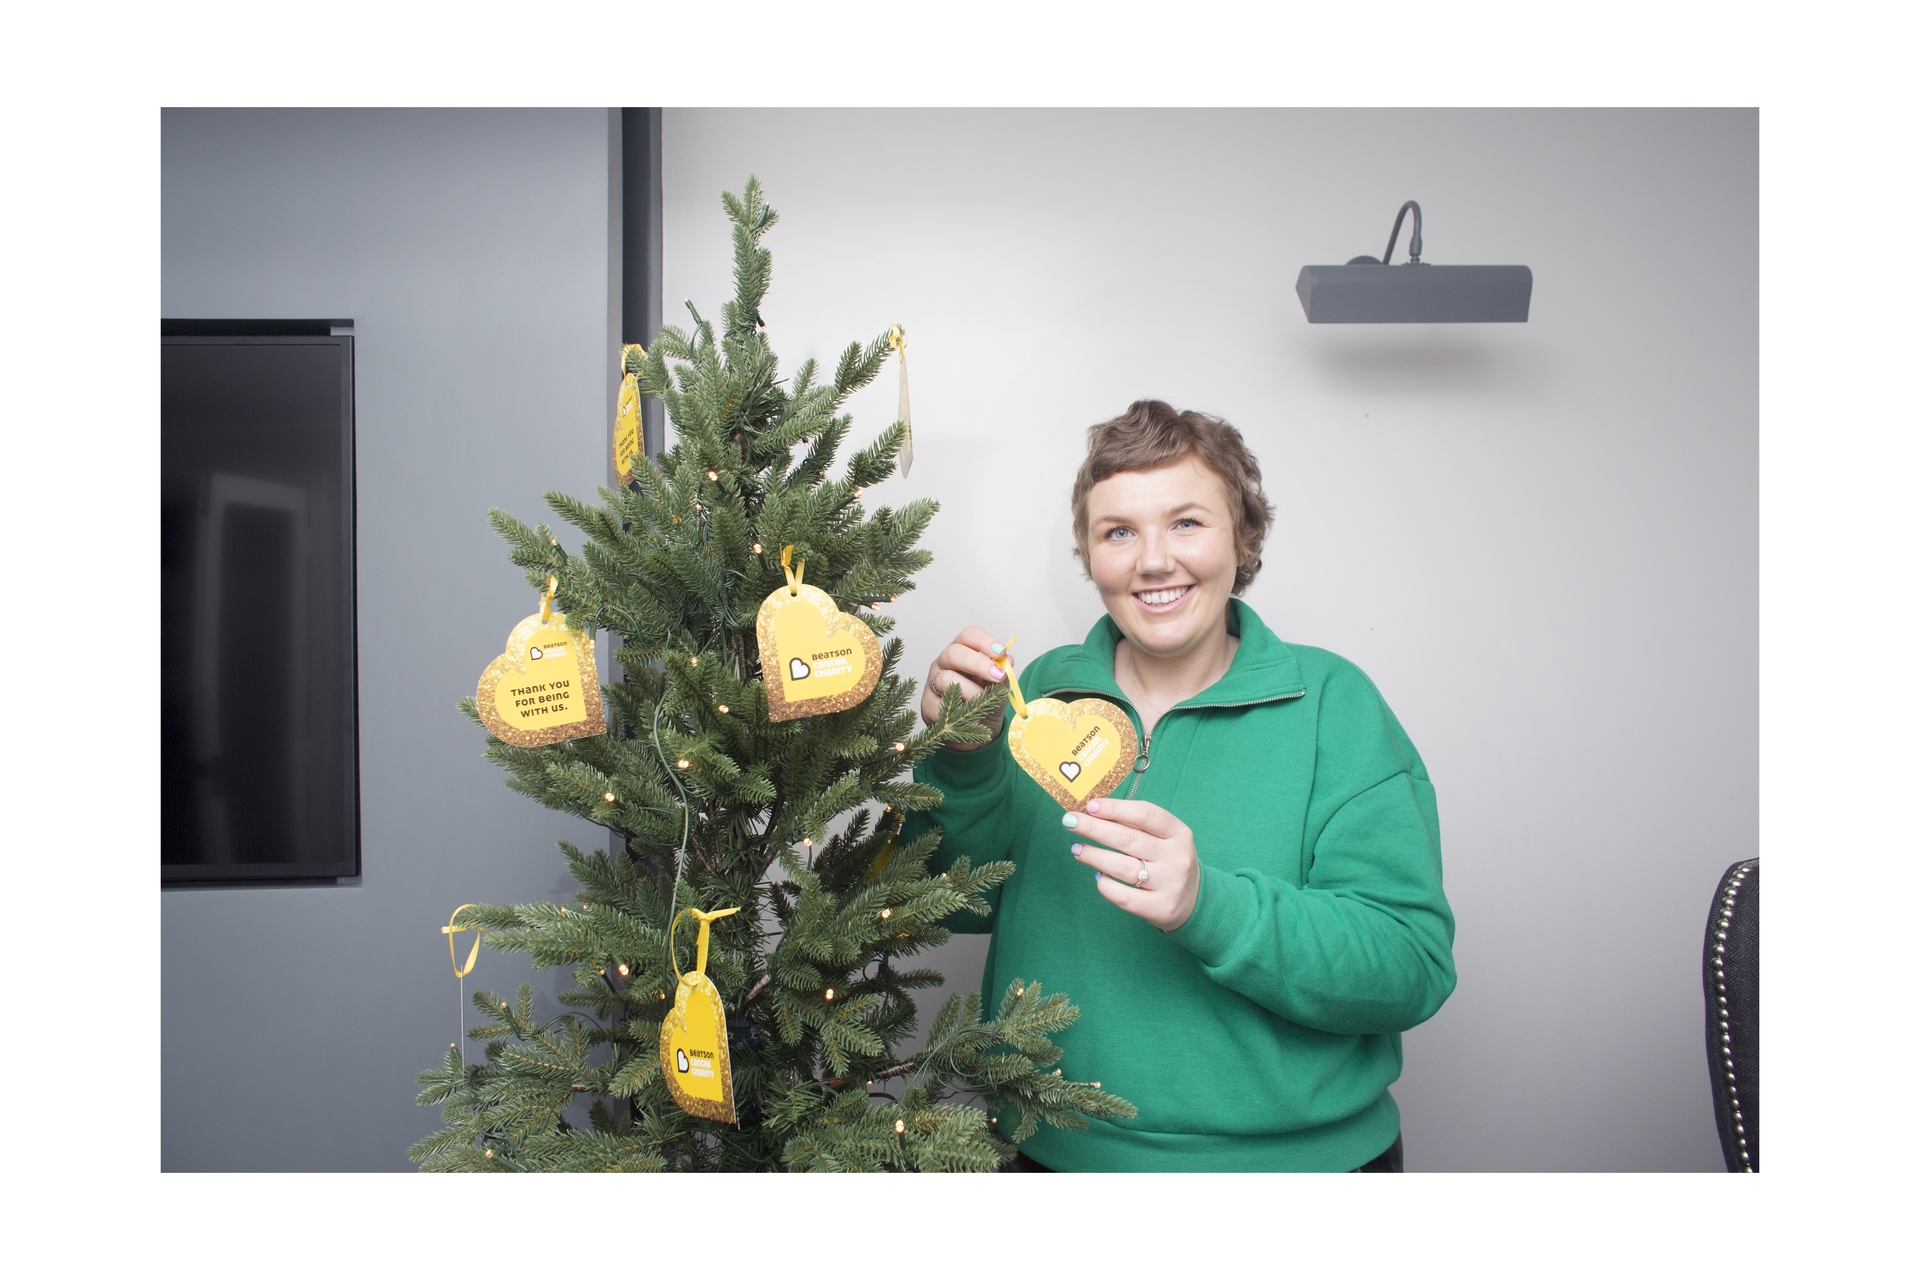 Errin is sharing her story as part of the Beatson's Bauble Appeal